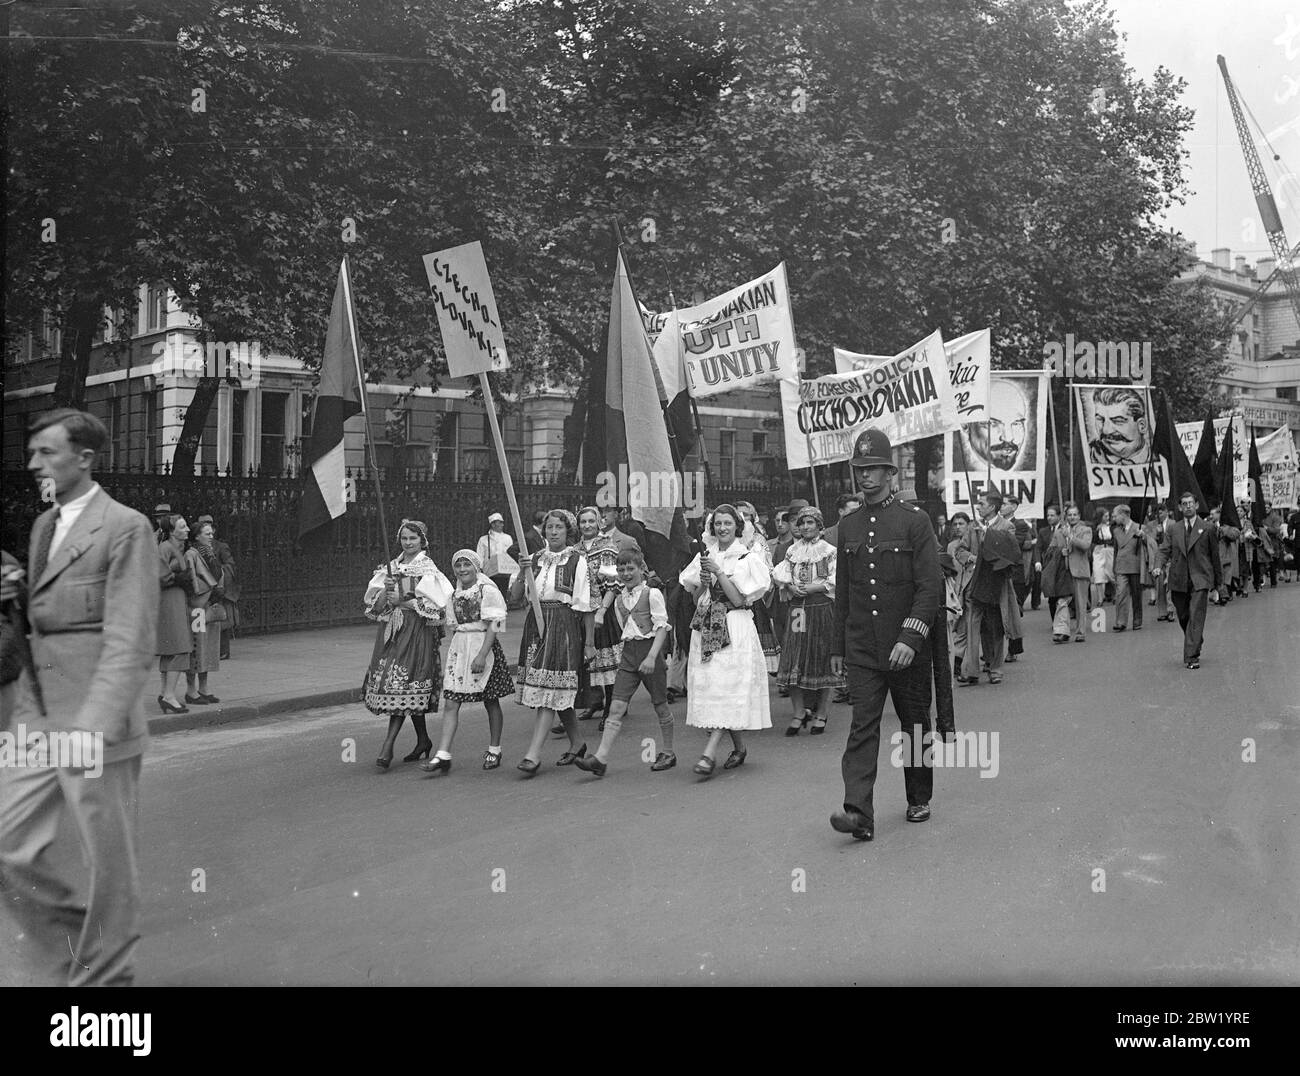 2000 rally in pageant of pace. March to Hyde Park. 2000 members of British youth organisation, wearing the national costumes of peaceloving countries. Took part in the gigantic pageant of peace rally to Hyde Park. Photo shows, the procession, led by girls in Czechoslovakian national costume, passing down Victoria embankment to Hyde Park. Photographs of Lenin are carried in the procession. 20 June 1937 Stock Photo